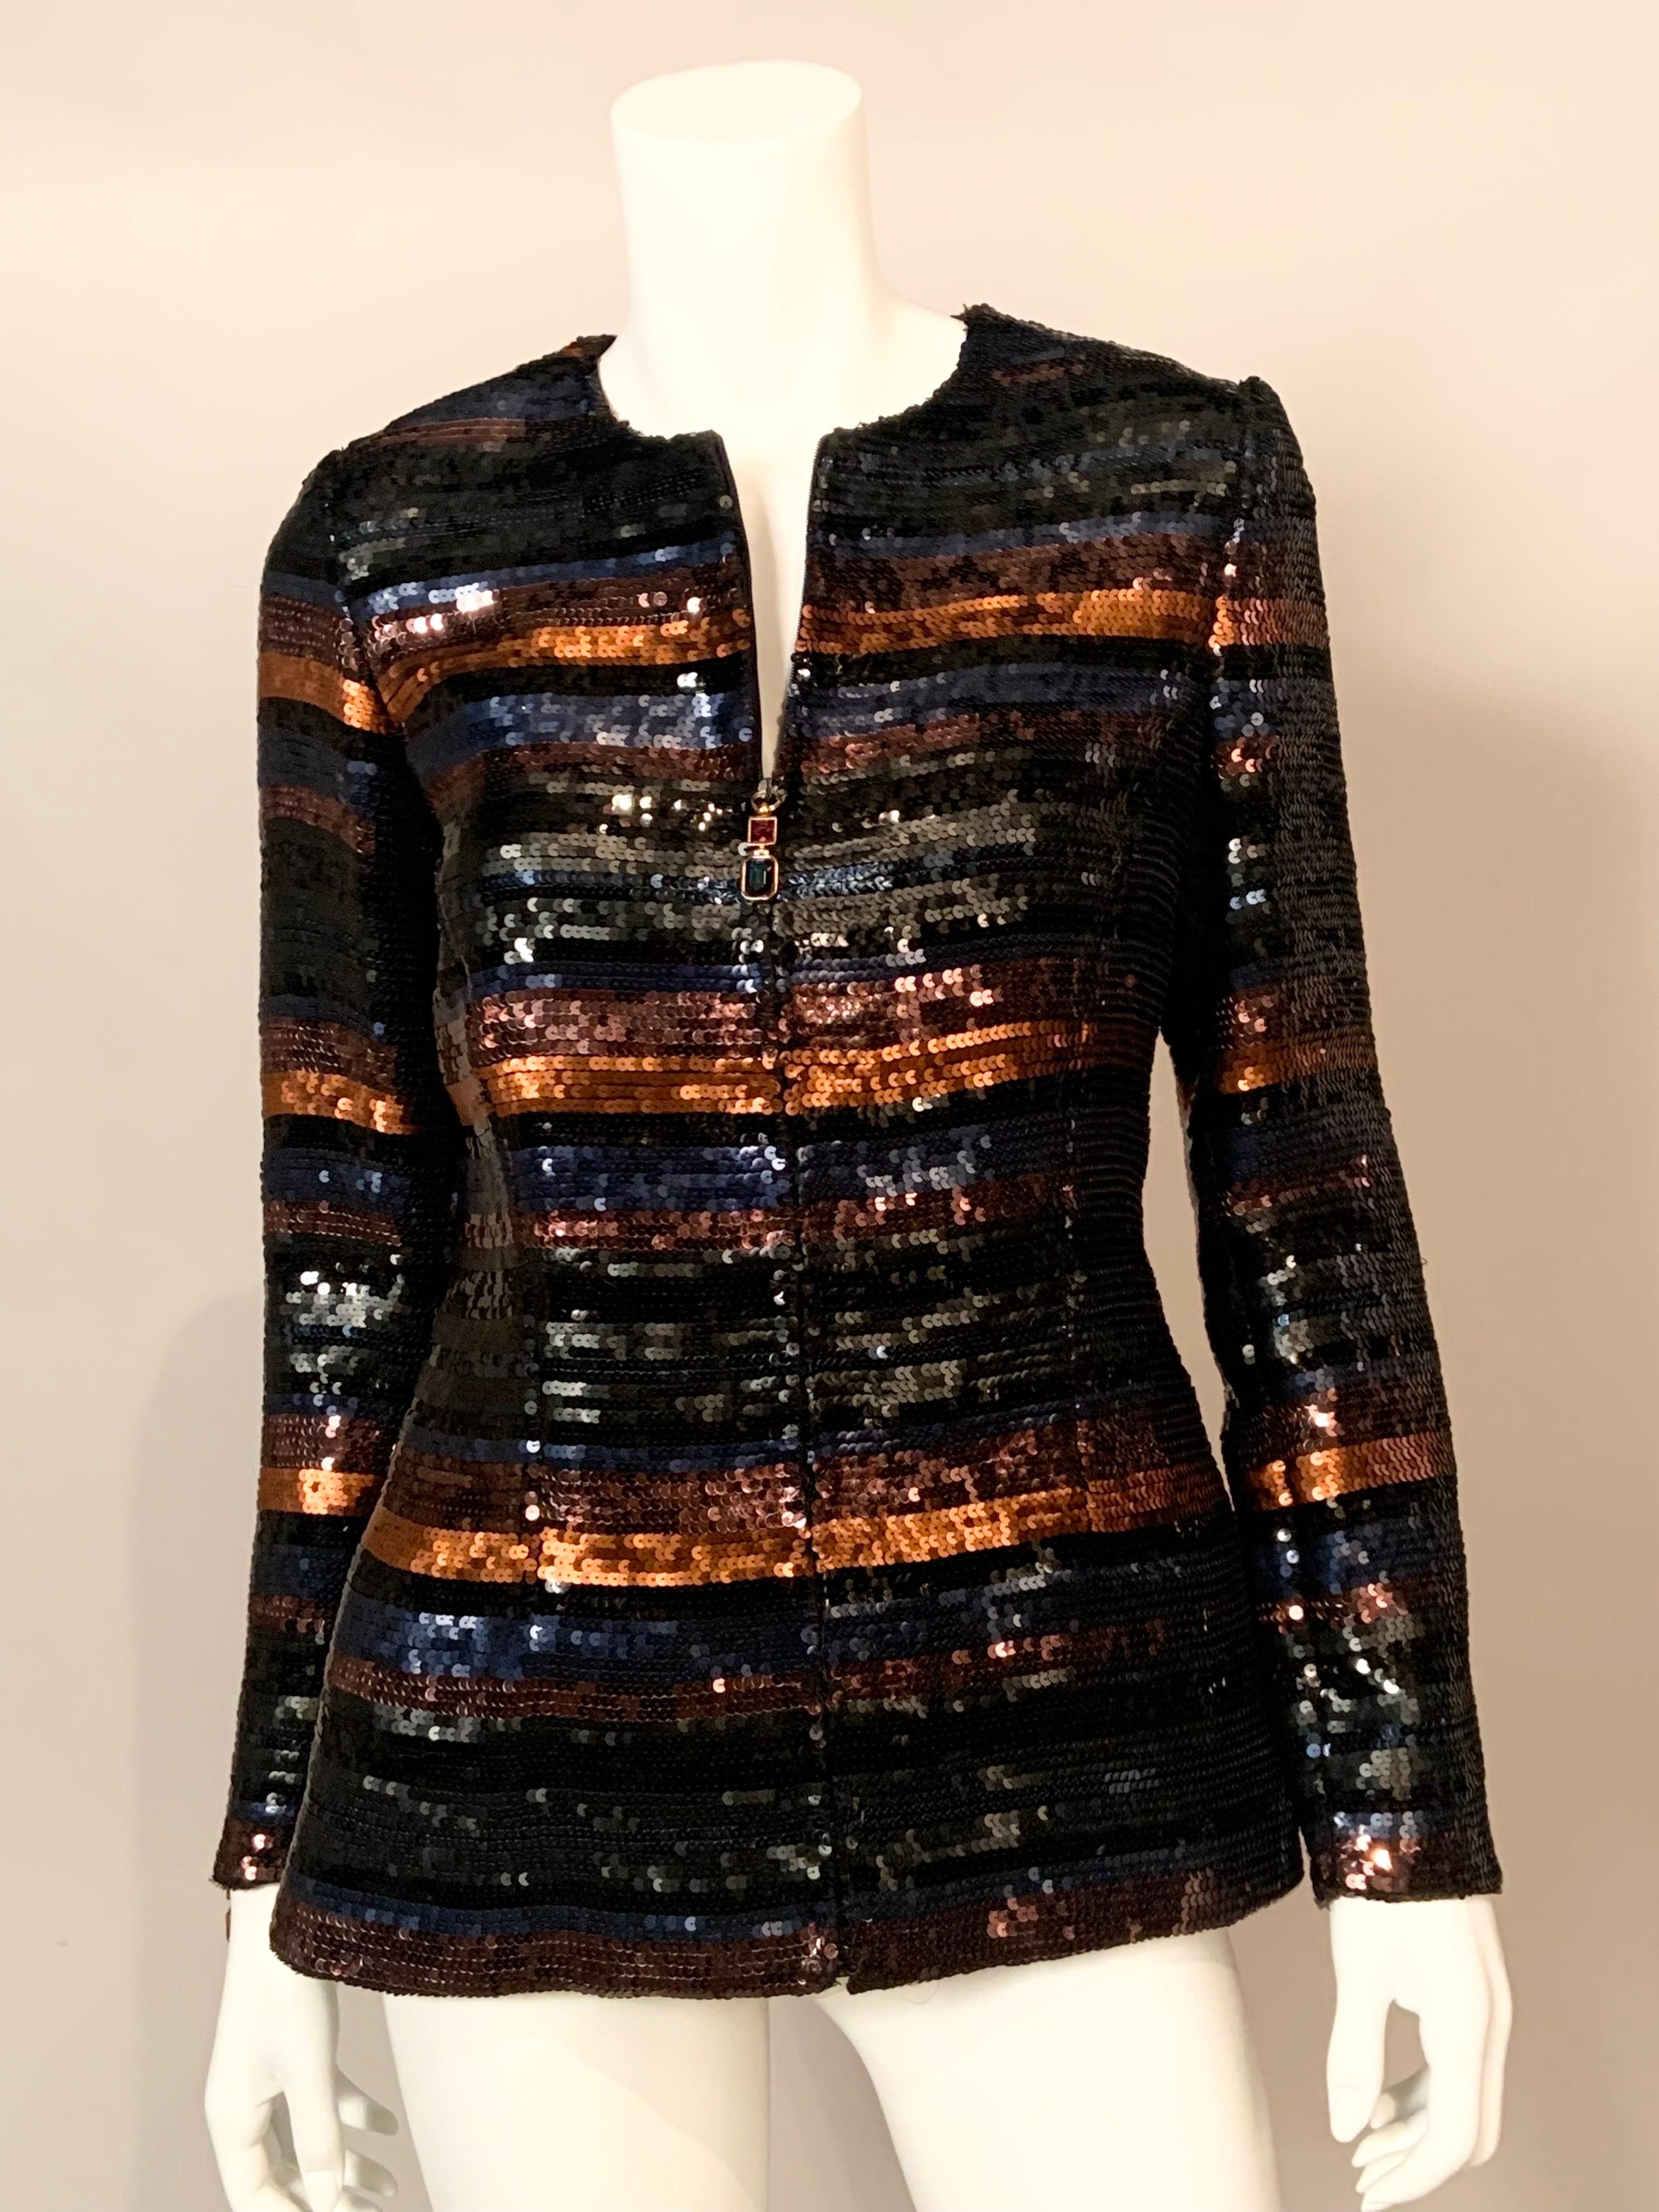 This zip front sequin jacket from Gianfranco Ferre is not only beautiful but it is quite versatile as well.  The multi color sequins allow you to pair it with many different pieces in to create a variety of looks.  The jacket is composed of shiny